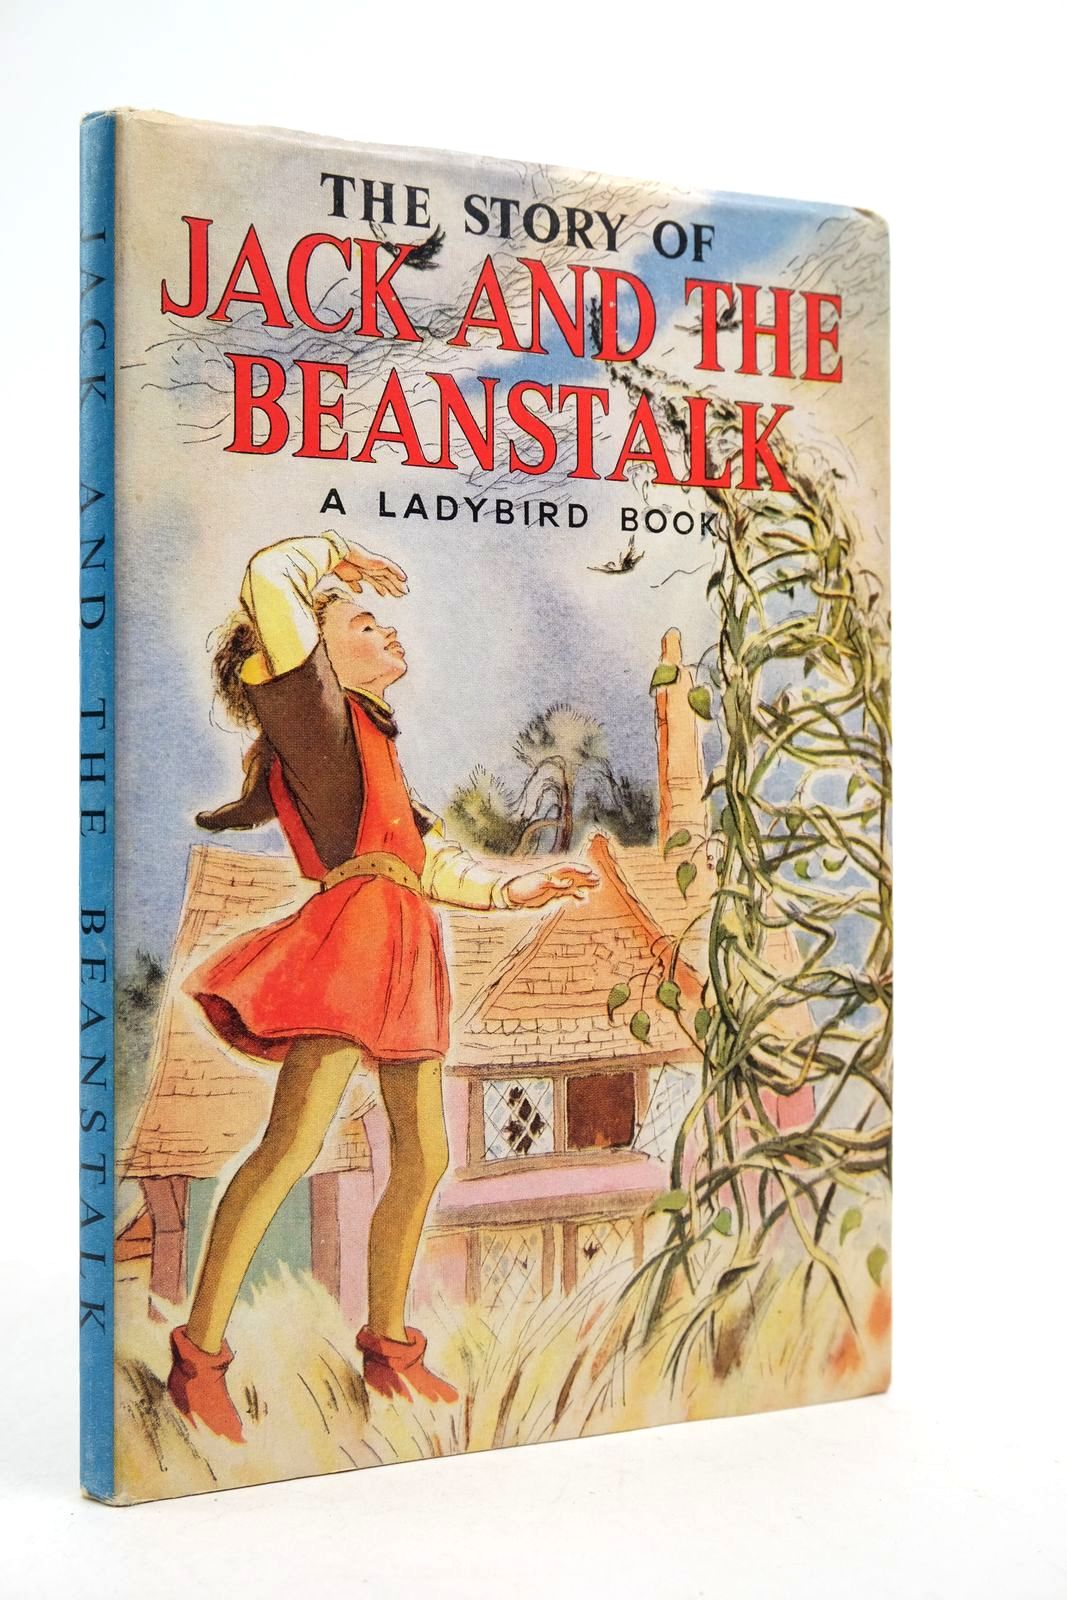 Photo of THE STORY OF JACK AND THE BEANSTALK written by Levy, Muriel illustrated by Murrell, Ruth published by Wills &amp; Hepworth Ltd. (STOCK CODE: 2139677)  for sale by Stella & Rose's Books